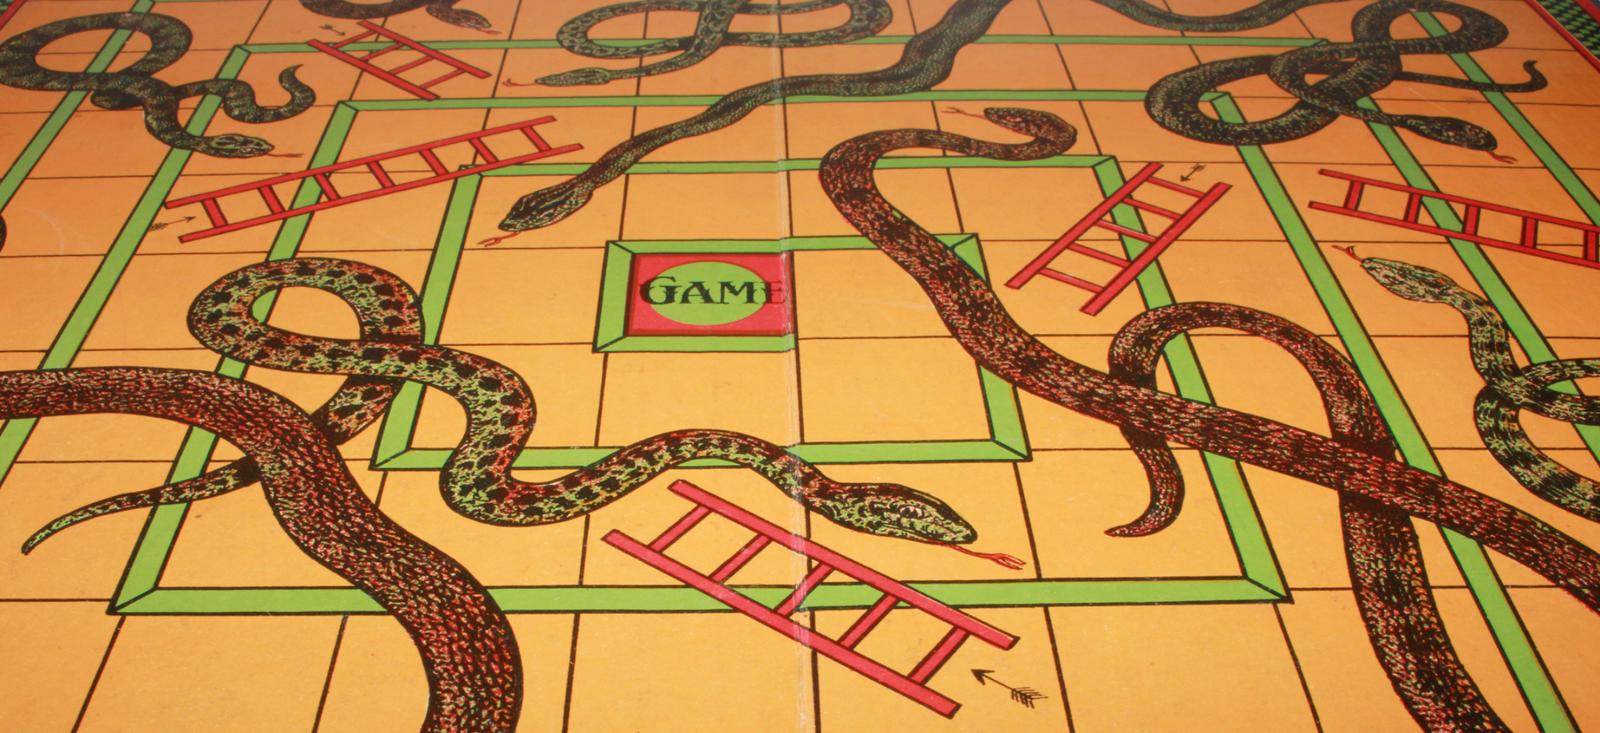 winners and losers in the game of ai workplace snakes ladders part 2